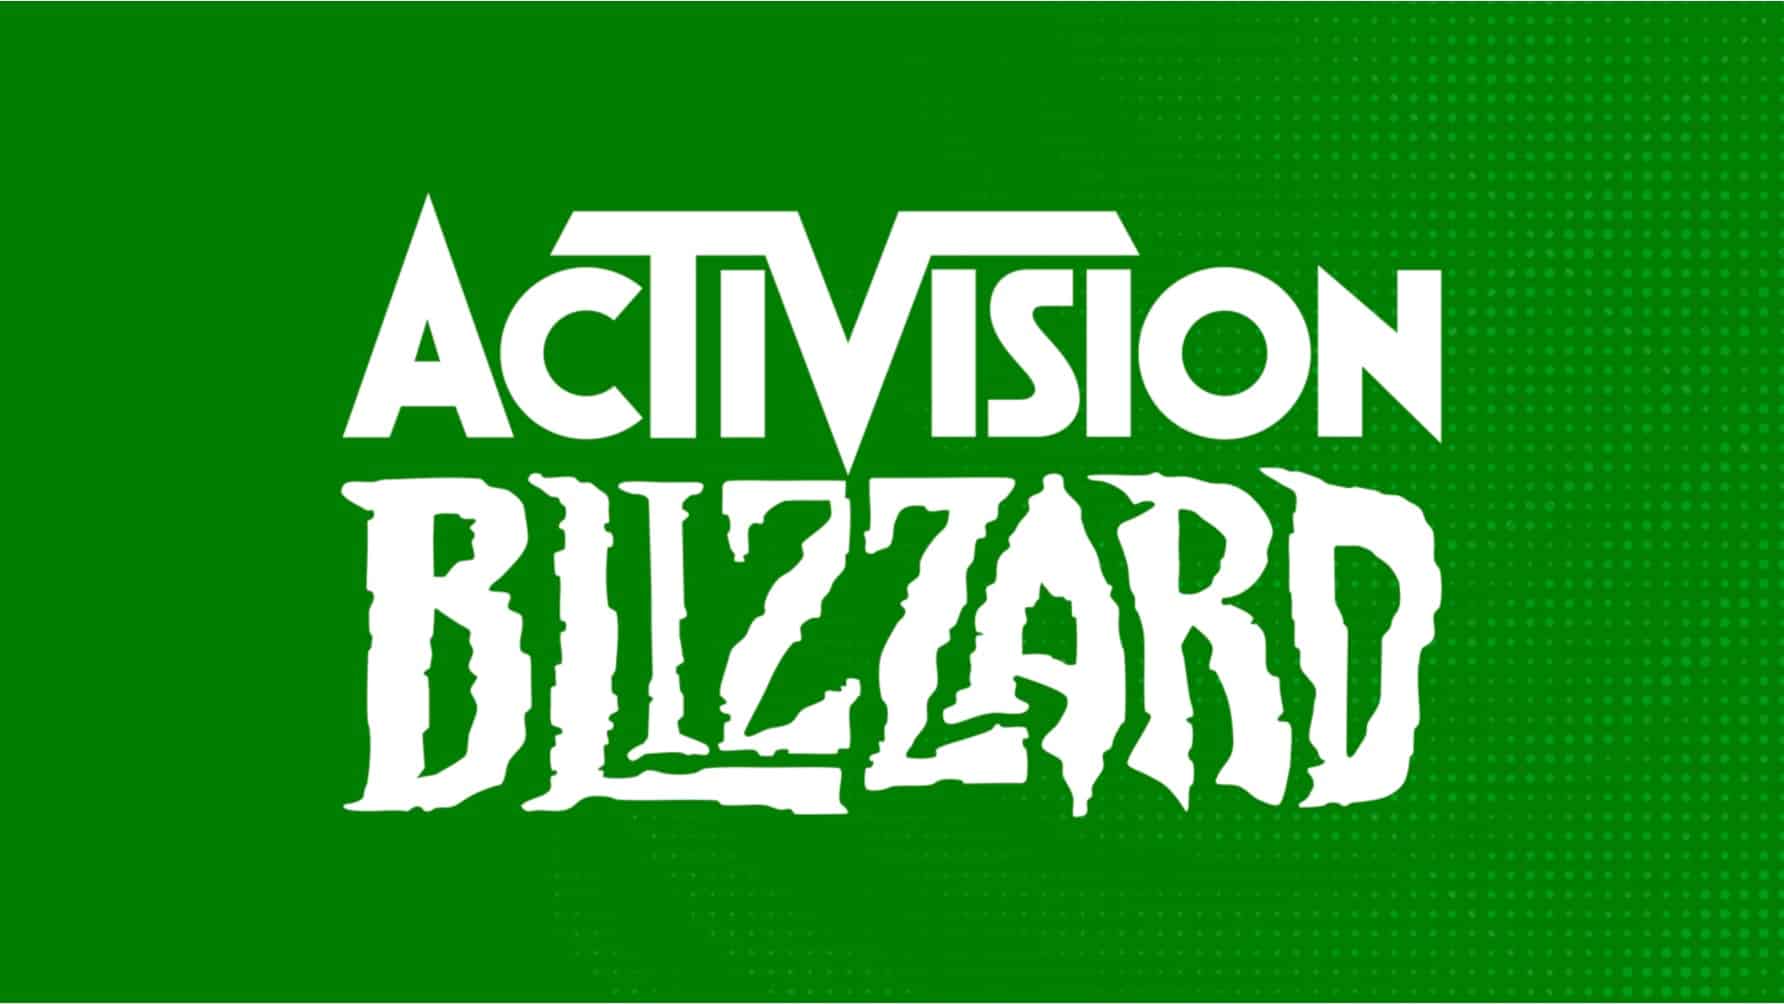 Microsoft to acquire Activision Blizzard in a deal valued $68.7 billion -   news